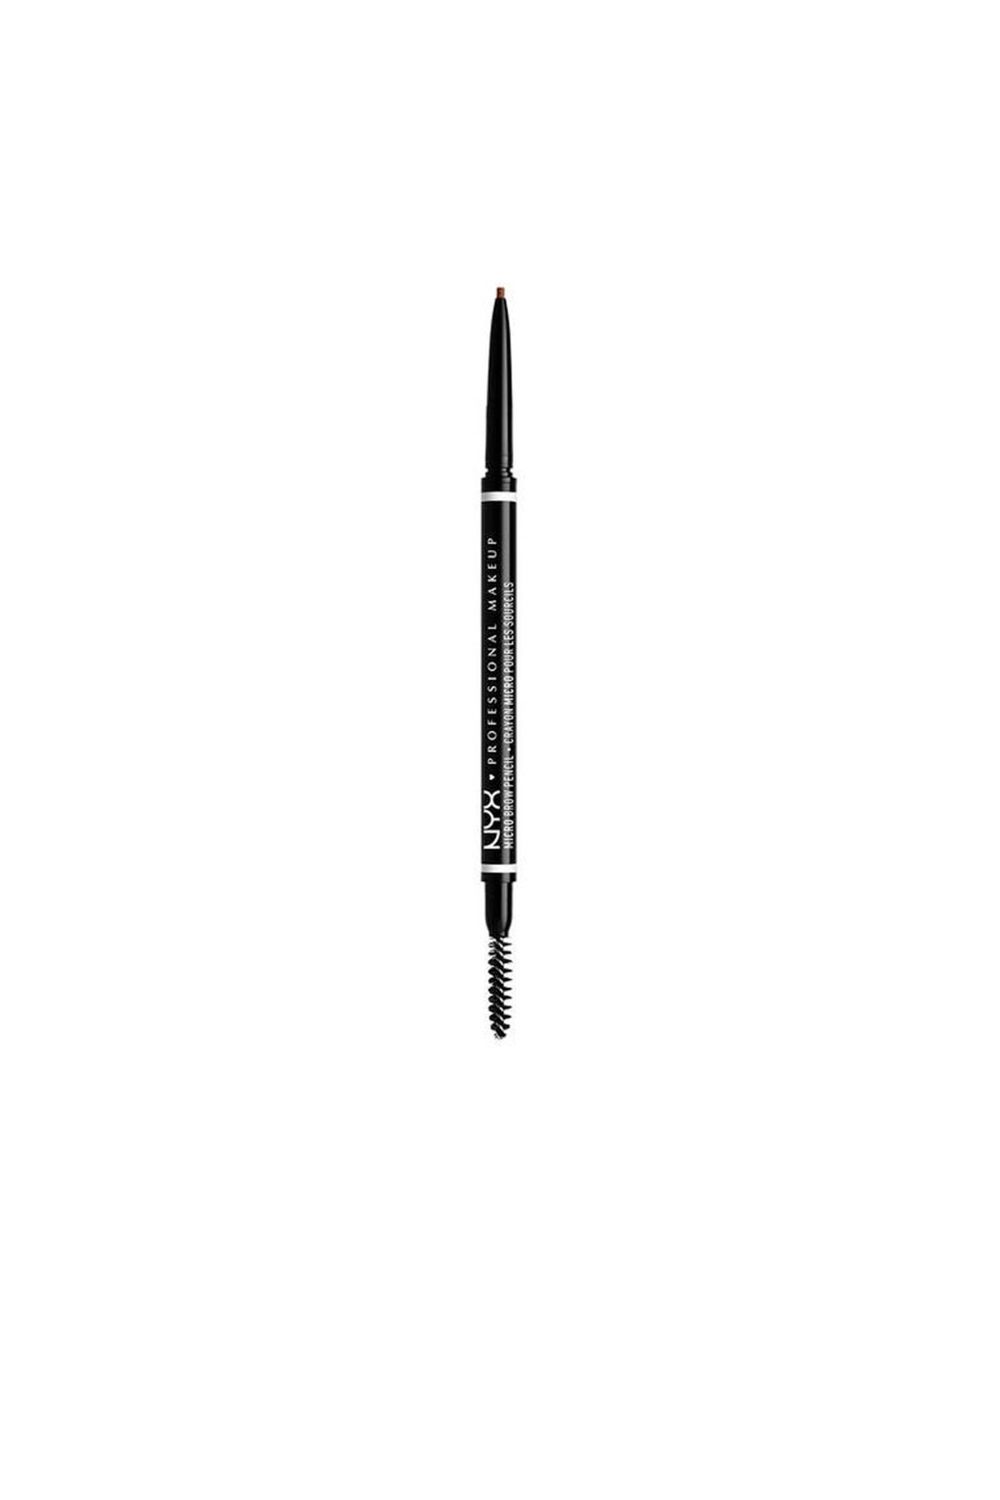 NYX Professional Makeup Micro Brow Pencil #brunette 0,5 g - Trendyol